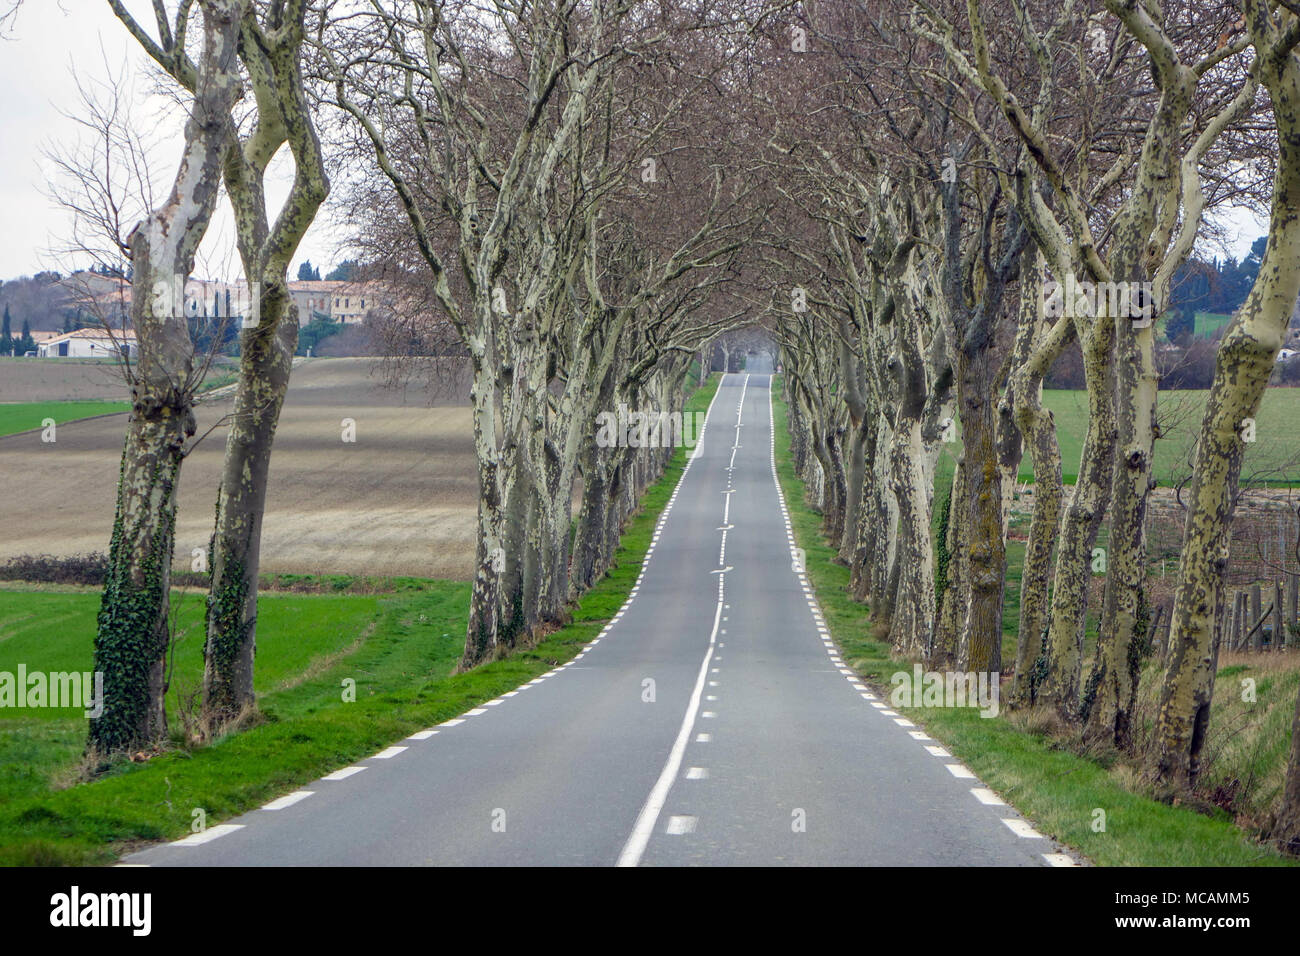 Avenue of Plane trees, beside road in Southern France Stock Photo